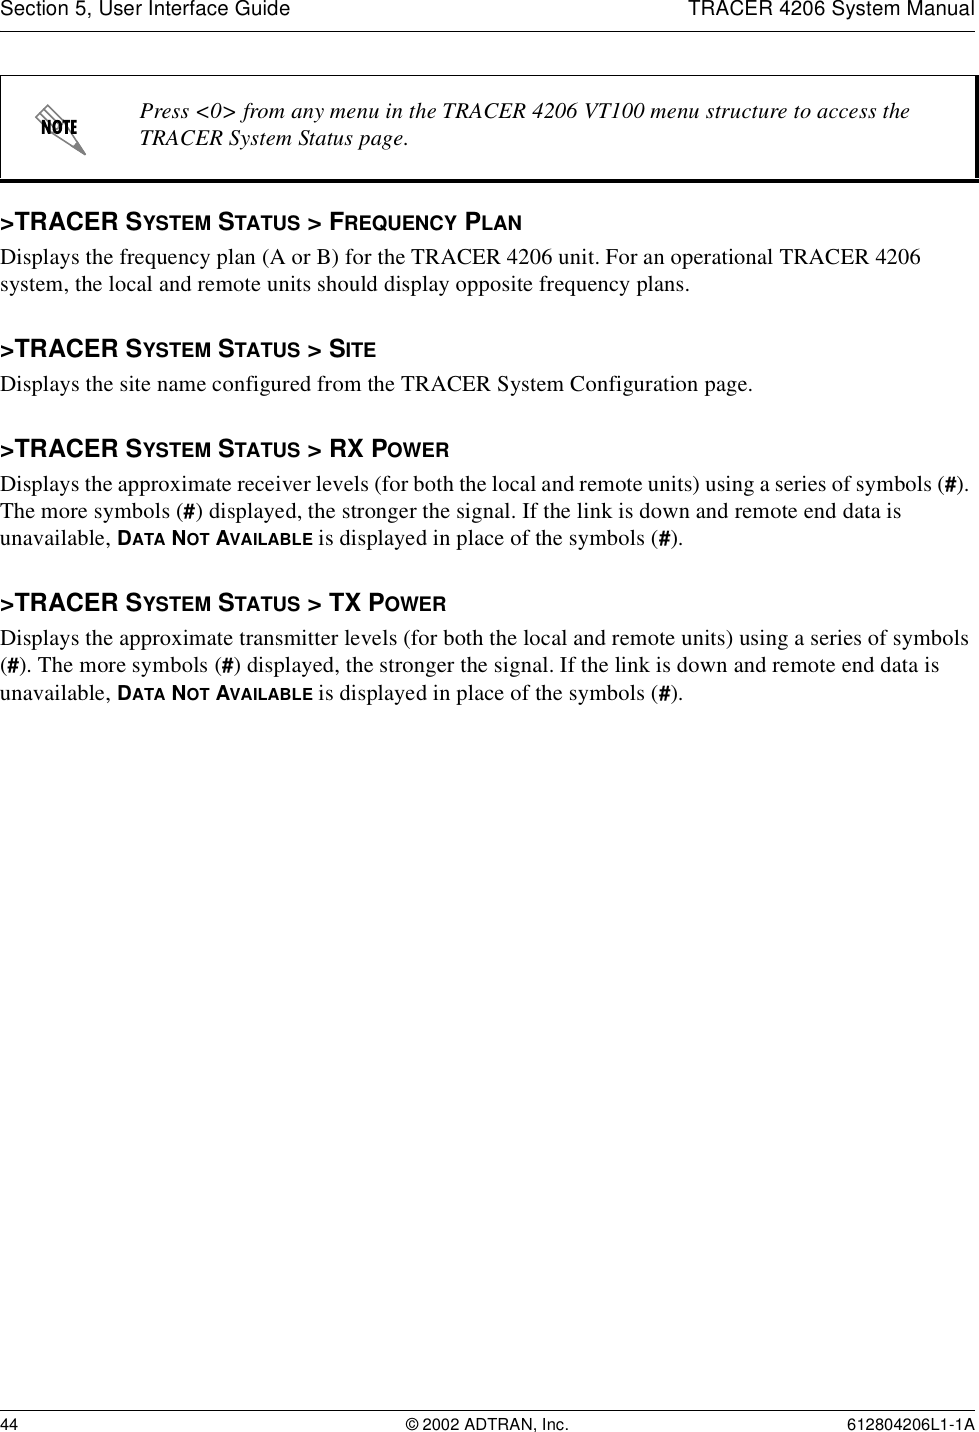 Section 5, User Interface Guide TRACER 4206 System Manual44 © 2002 ADTRAN, Inc. 612804206L1-1A&gt;TRACER SYSTEM STATUS &gt; FREQUENCY PLANDisplays the frequency plan (A or B) for the TRACER 4206 unit. For an operational TRACER 4206 system, the local and remote units should display opposite frequency plans.&gt;TRACER SYSTEM STATUS &gt; SITEDisplays the site name configured from the TRACER System Configuration page.&gt;TRACER SYSTEM STATUS &gt; RX POWERDisplays the approximate receiver levels (for both the local and remote units) using a series of symbols (#). The more symbols (#) displayed, the stronger the signal. If the link is down and remote end data is unavailable, DATA NOT AVAILABLE is displayed in place of the symbols (#).&gt;TRACER SYSTEM STATUS &gt; TX POWERDisplays the approximate transmitter levels (for both the local and remote units) using a series of symbols (#). The more symbols (#) displayed, the stronger the signal. If the link is down and remote end data is unavailable, DATA NOT AVAILABLE is displayed in place of the symbols (#).Press &lt;0&gt; from any menu in the TRACER 4206 VT100 menu structure to access the TRACER System Status page.